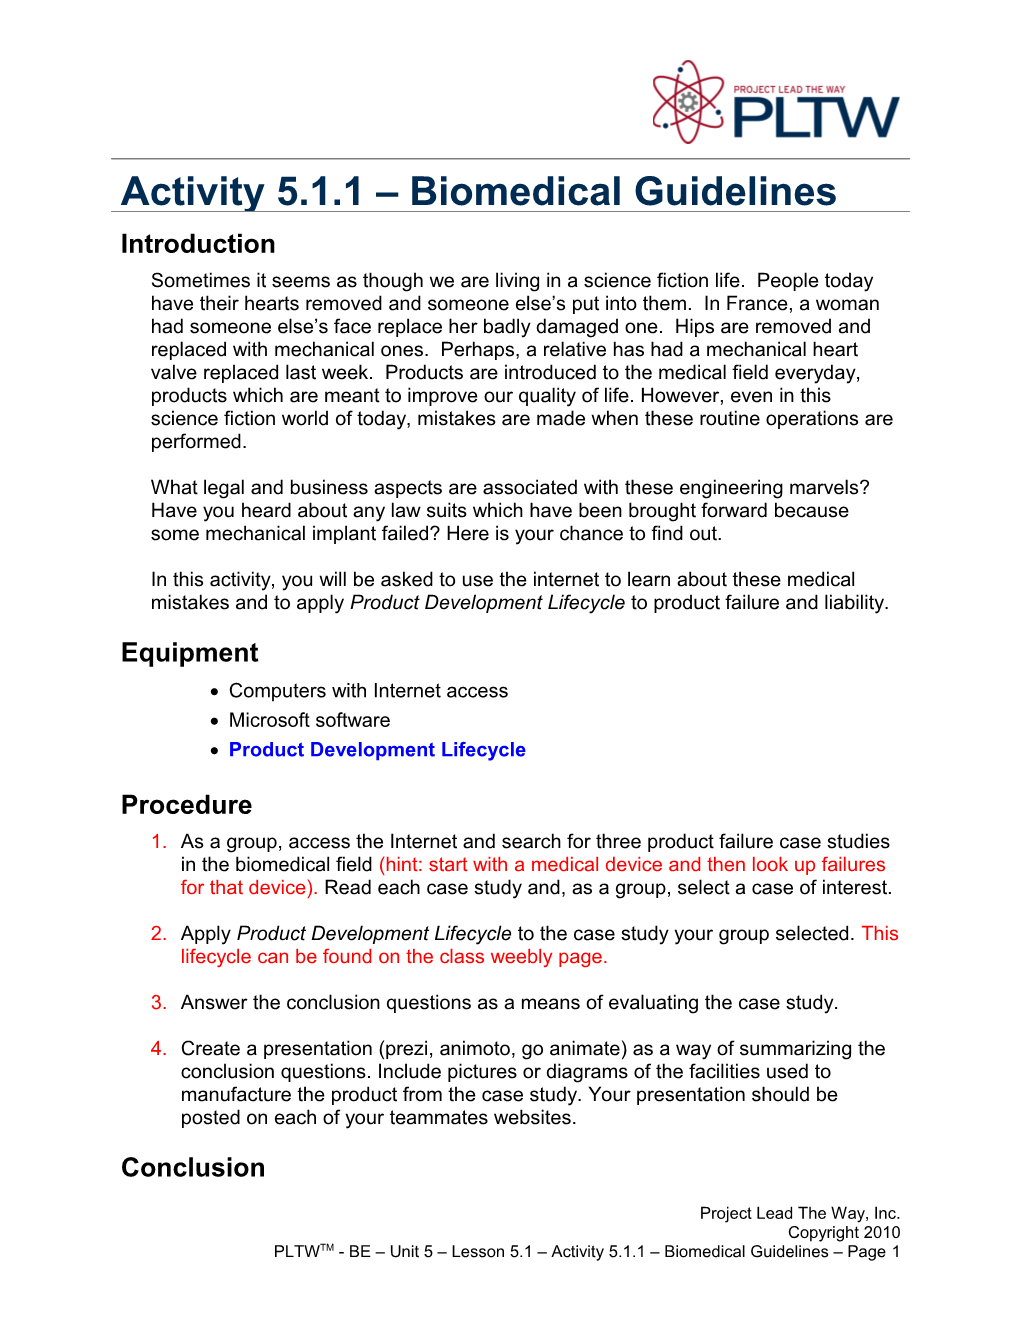 Activity 5.1.1: Biomedical Guidelines